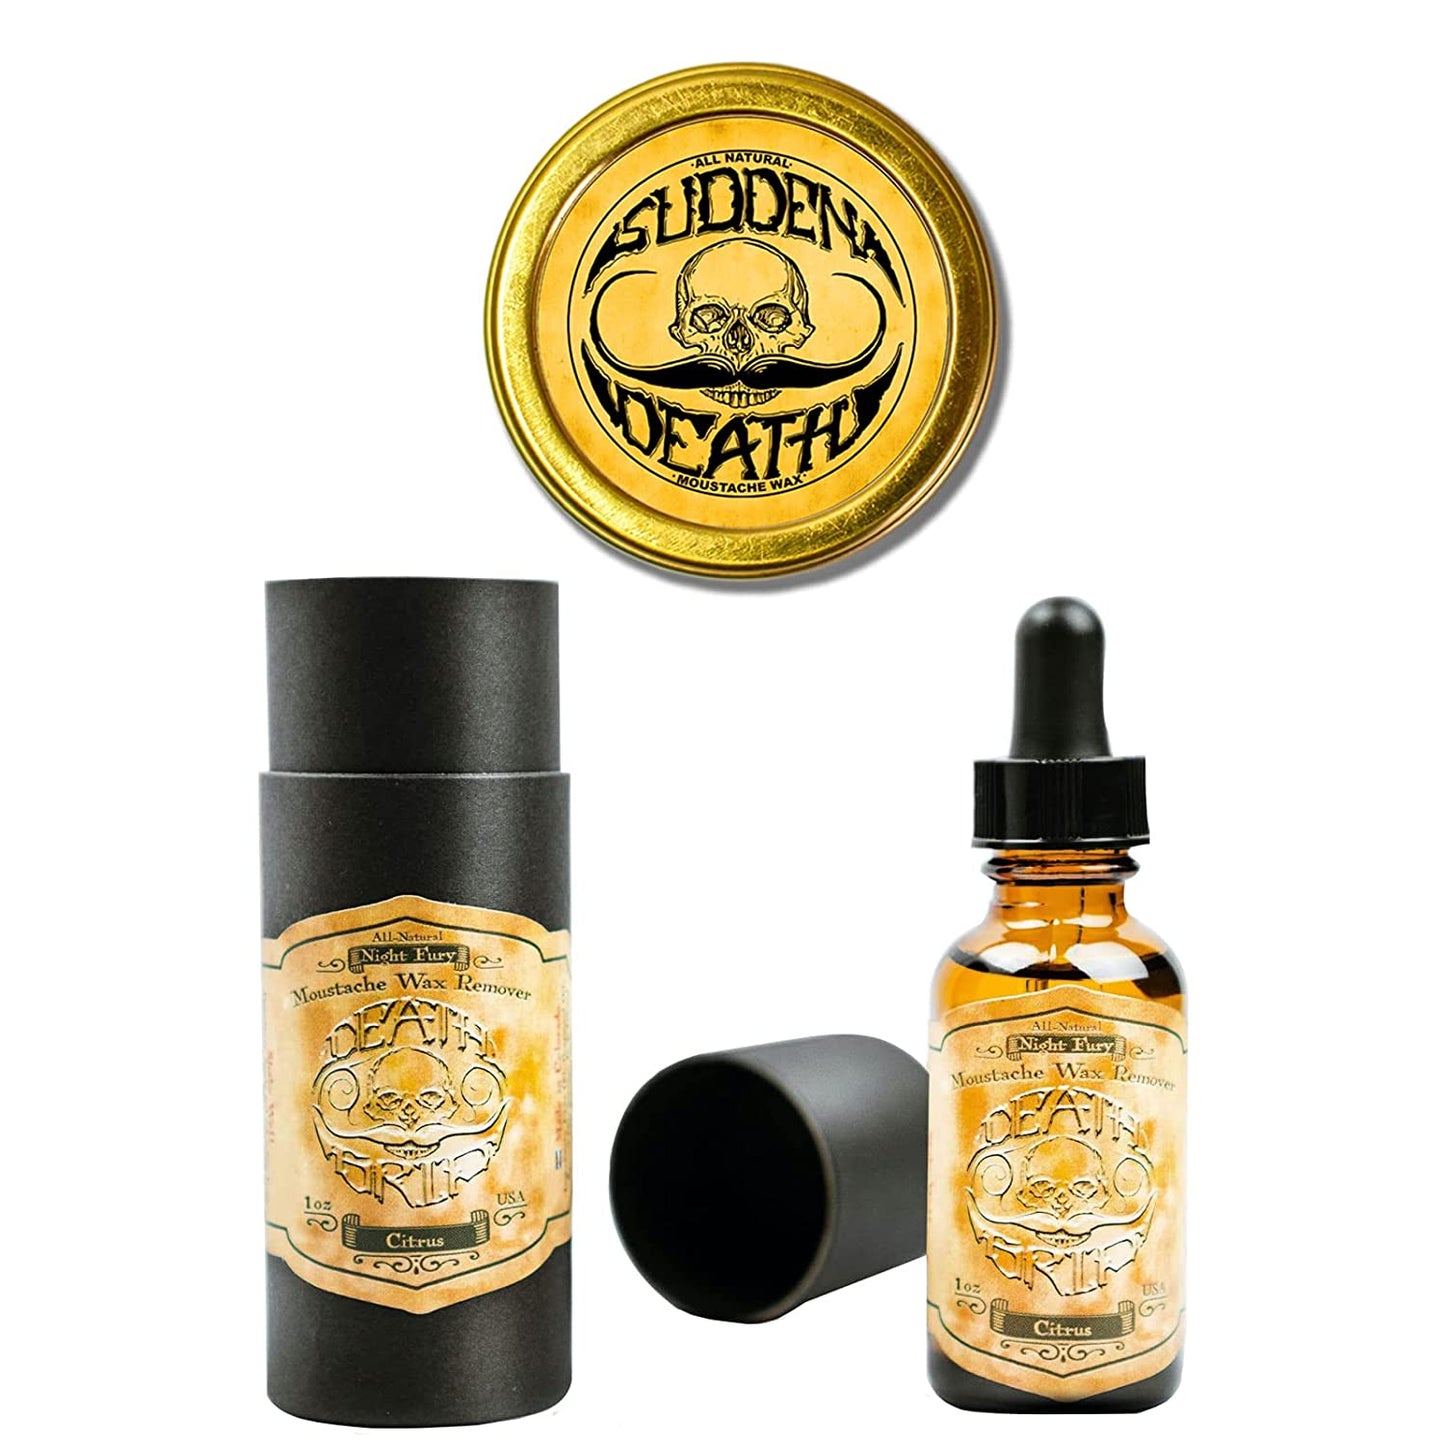 Sudden Death Strong Hold Mustache Wax and Night Fury Mustache Wax Remover Oil Set